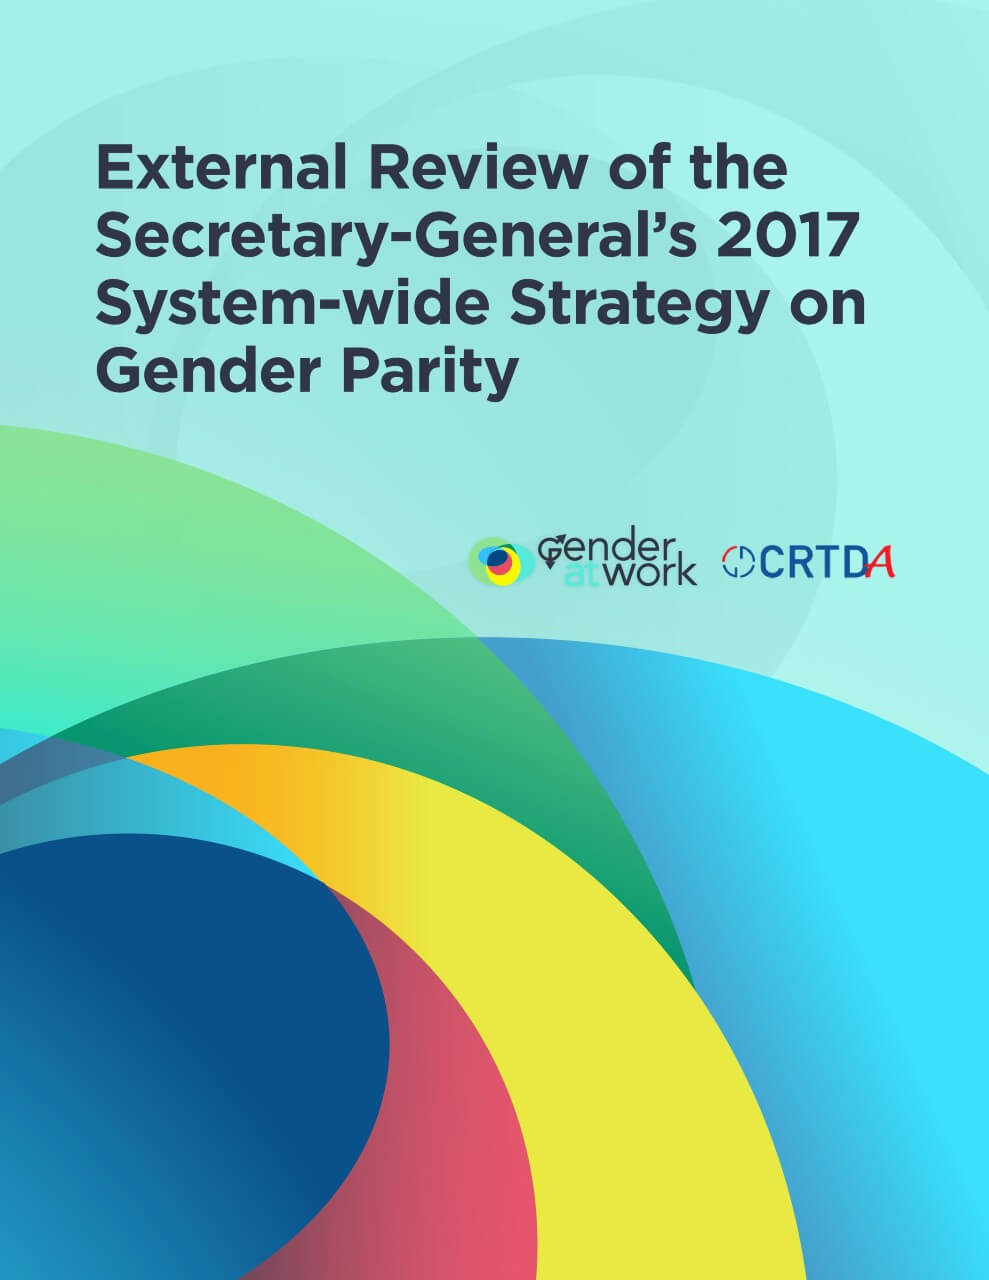 External review of the Secretary-General’s 2017 System-wide Strategy on Gender Parity